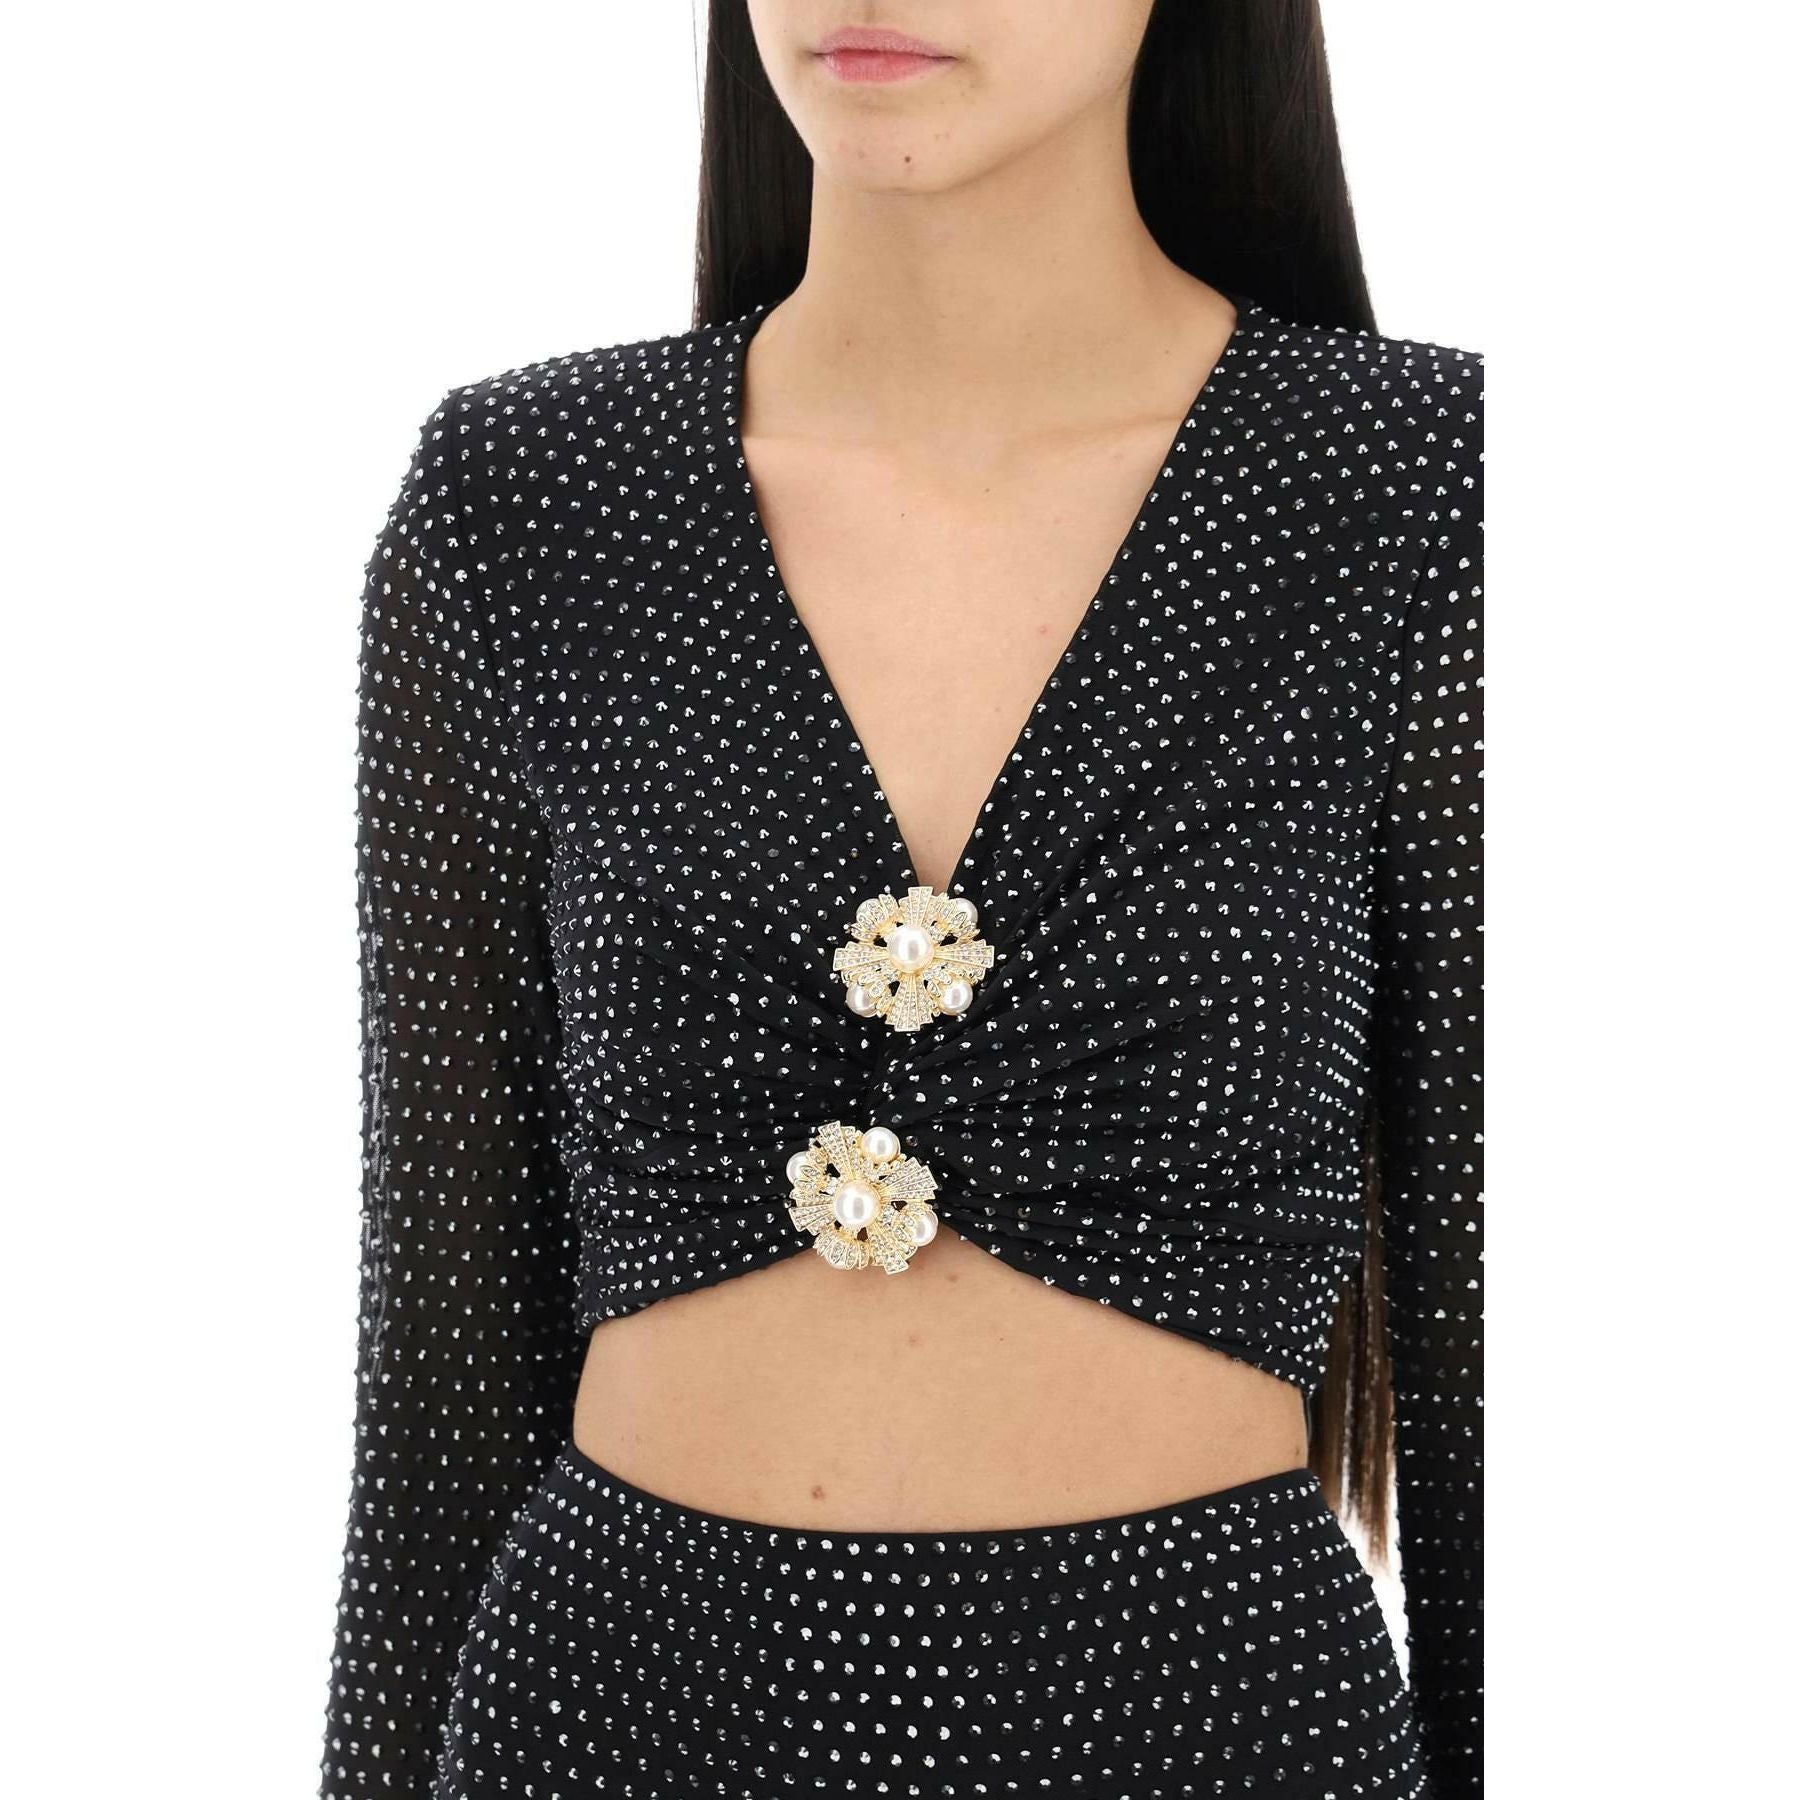 Rhinestone Studded Cropped Top With Diamanté Brooches SELF PORTRAIT JOHN JULIA.